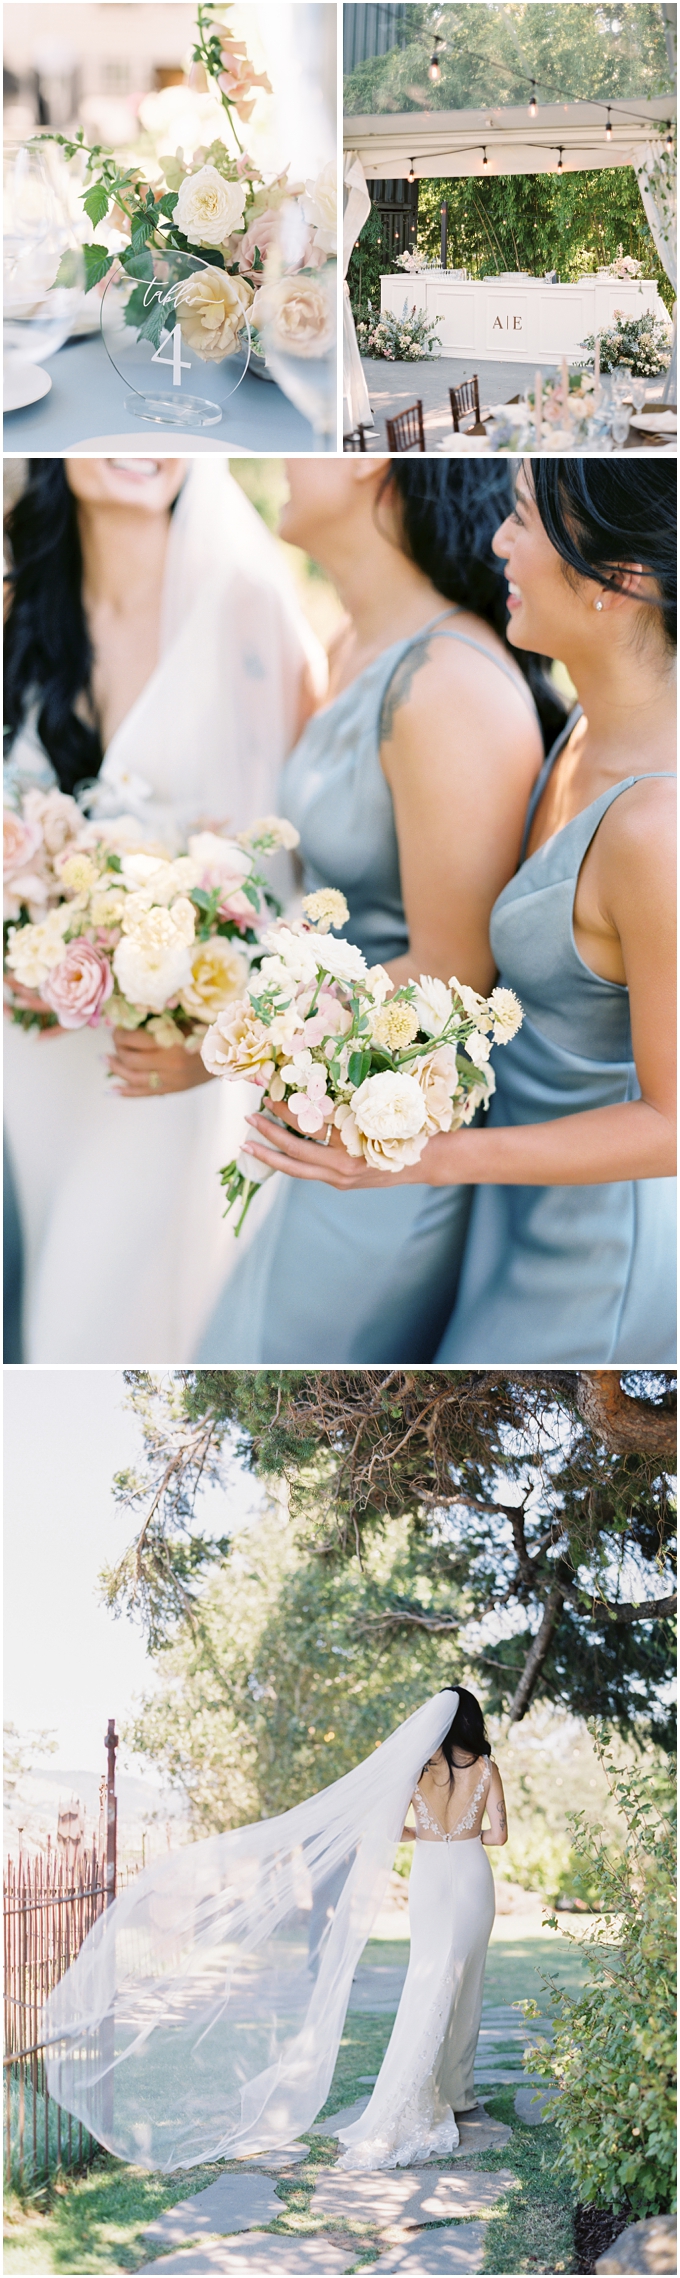 bridesmaids and wedding flowers by seventh stem